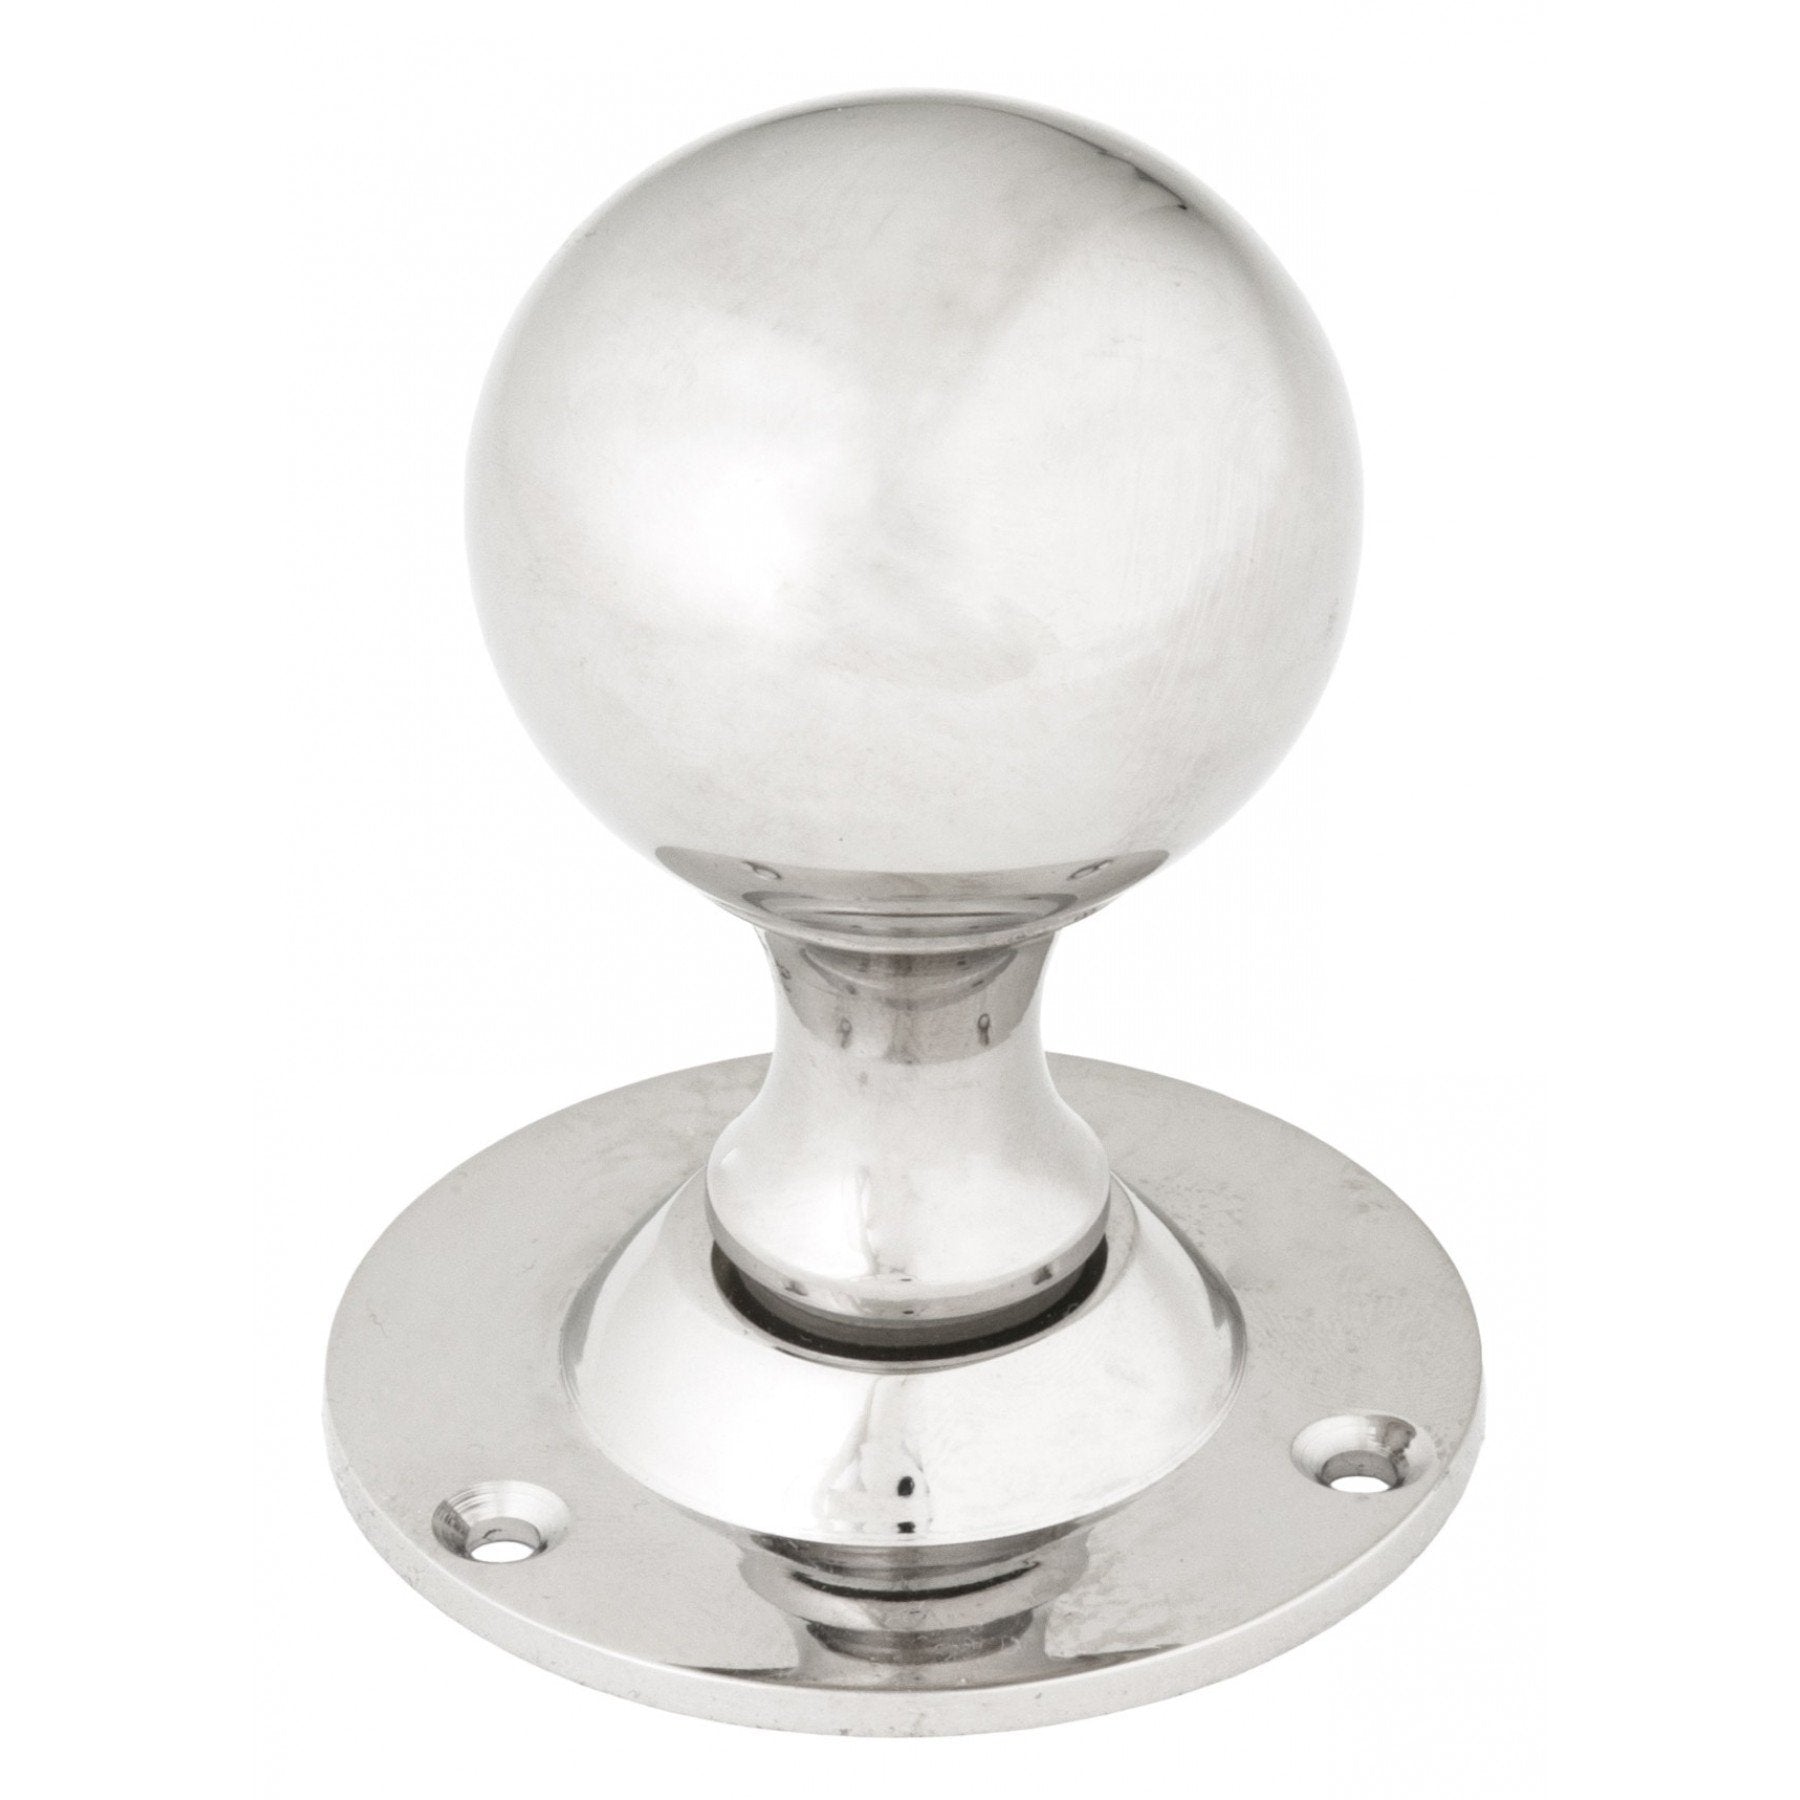 From the Anvil Polished Nickel Ball Mortice Knob Set - No.42 Interiors